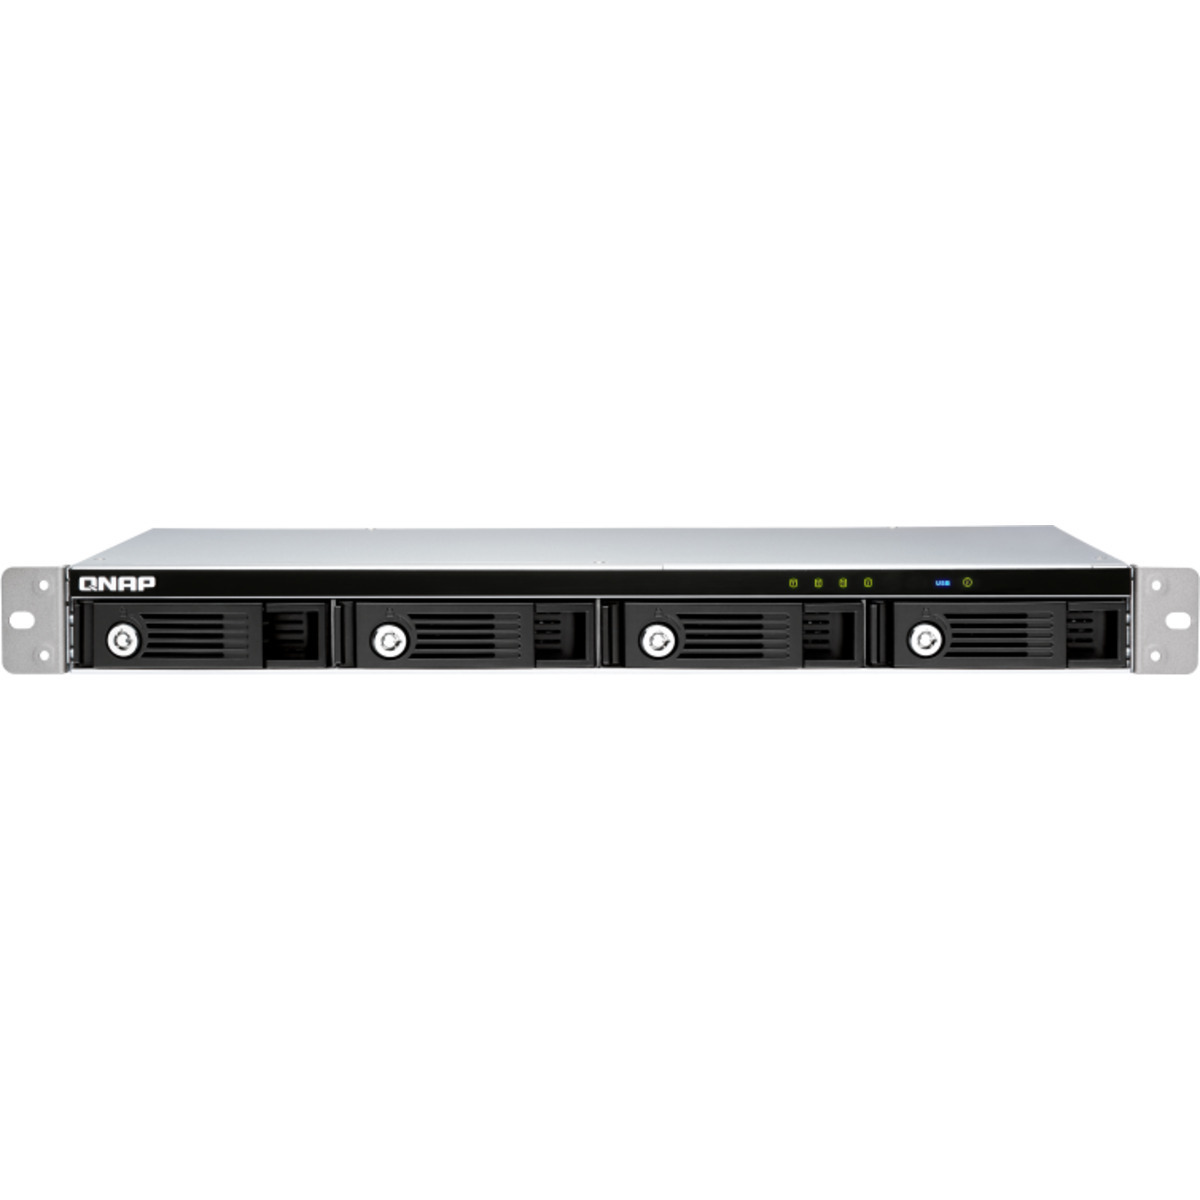 QNAP TR-004U External Expansion Drive 6tb 4-Bay RackMount Multimedia / Power User / Business Expansion Enclosure 3x2tb Crucial MX500 CT2000MX500SSD1 2.5 560/510MB/s SATA 6Gb/s SSD CONSUMER Class Drives Installed - Burn-In Tested TR-004U External Expansion Drive